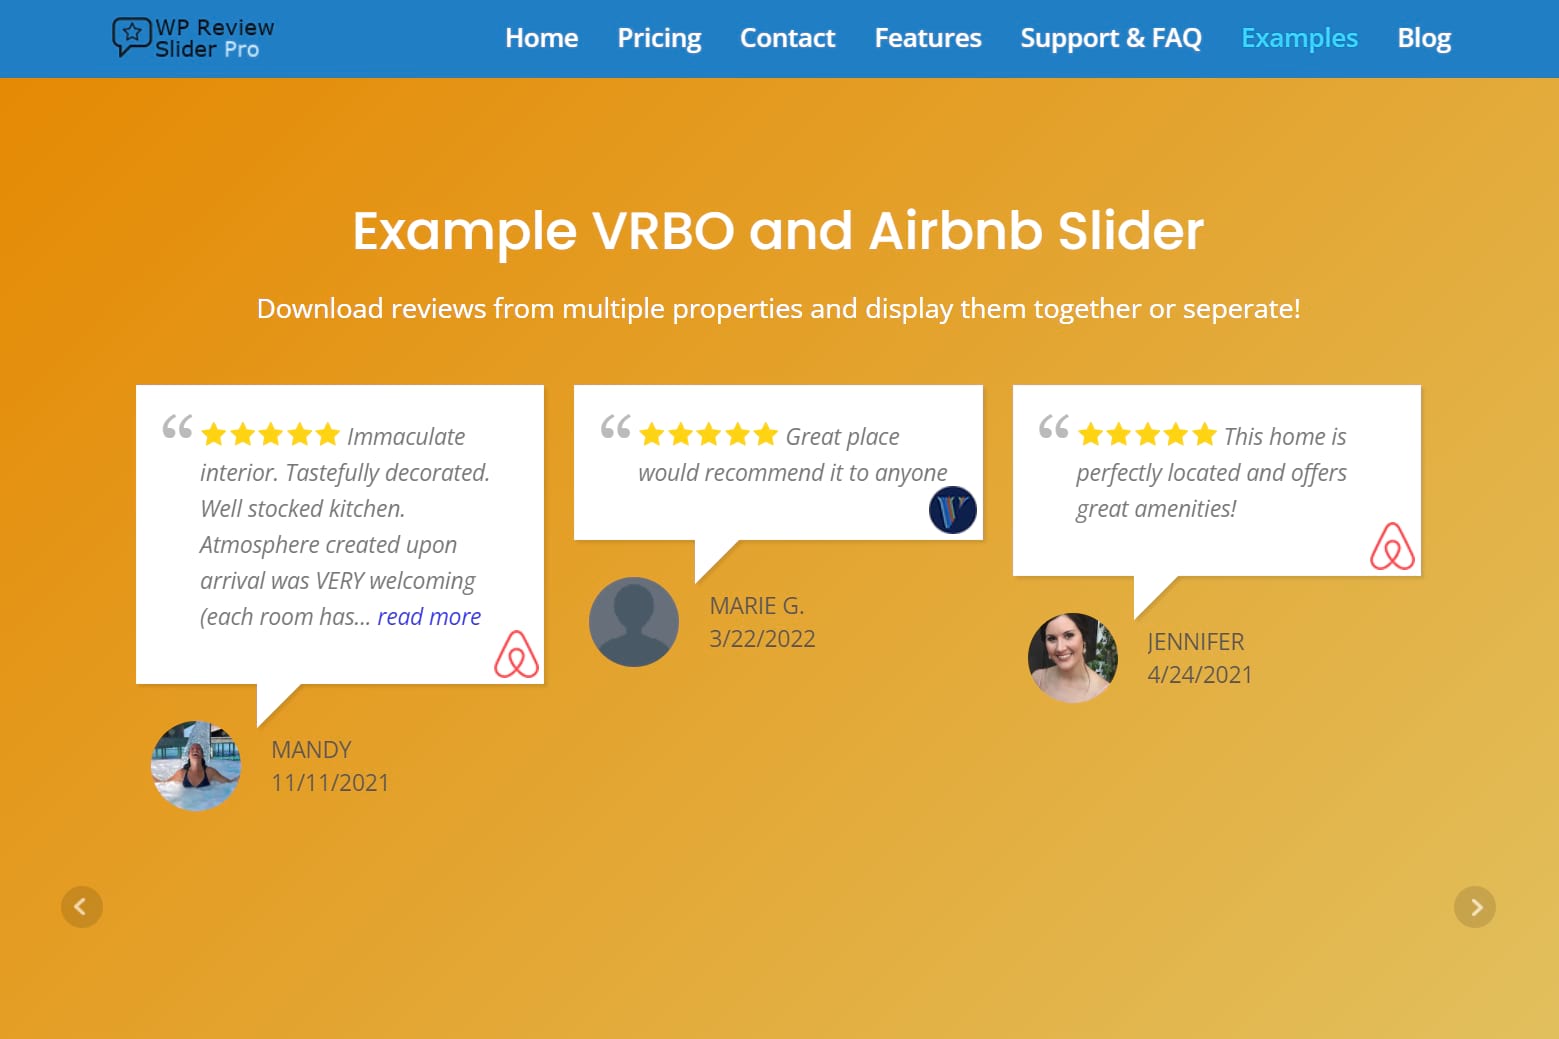 WP Review Slider Pro - Example of VRBO and Airbnb review sliders